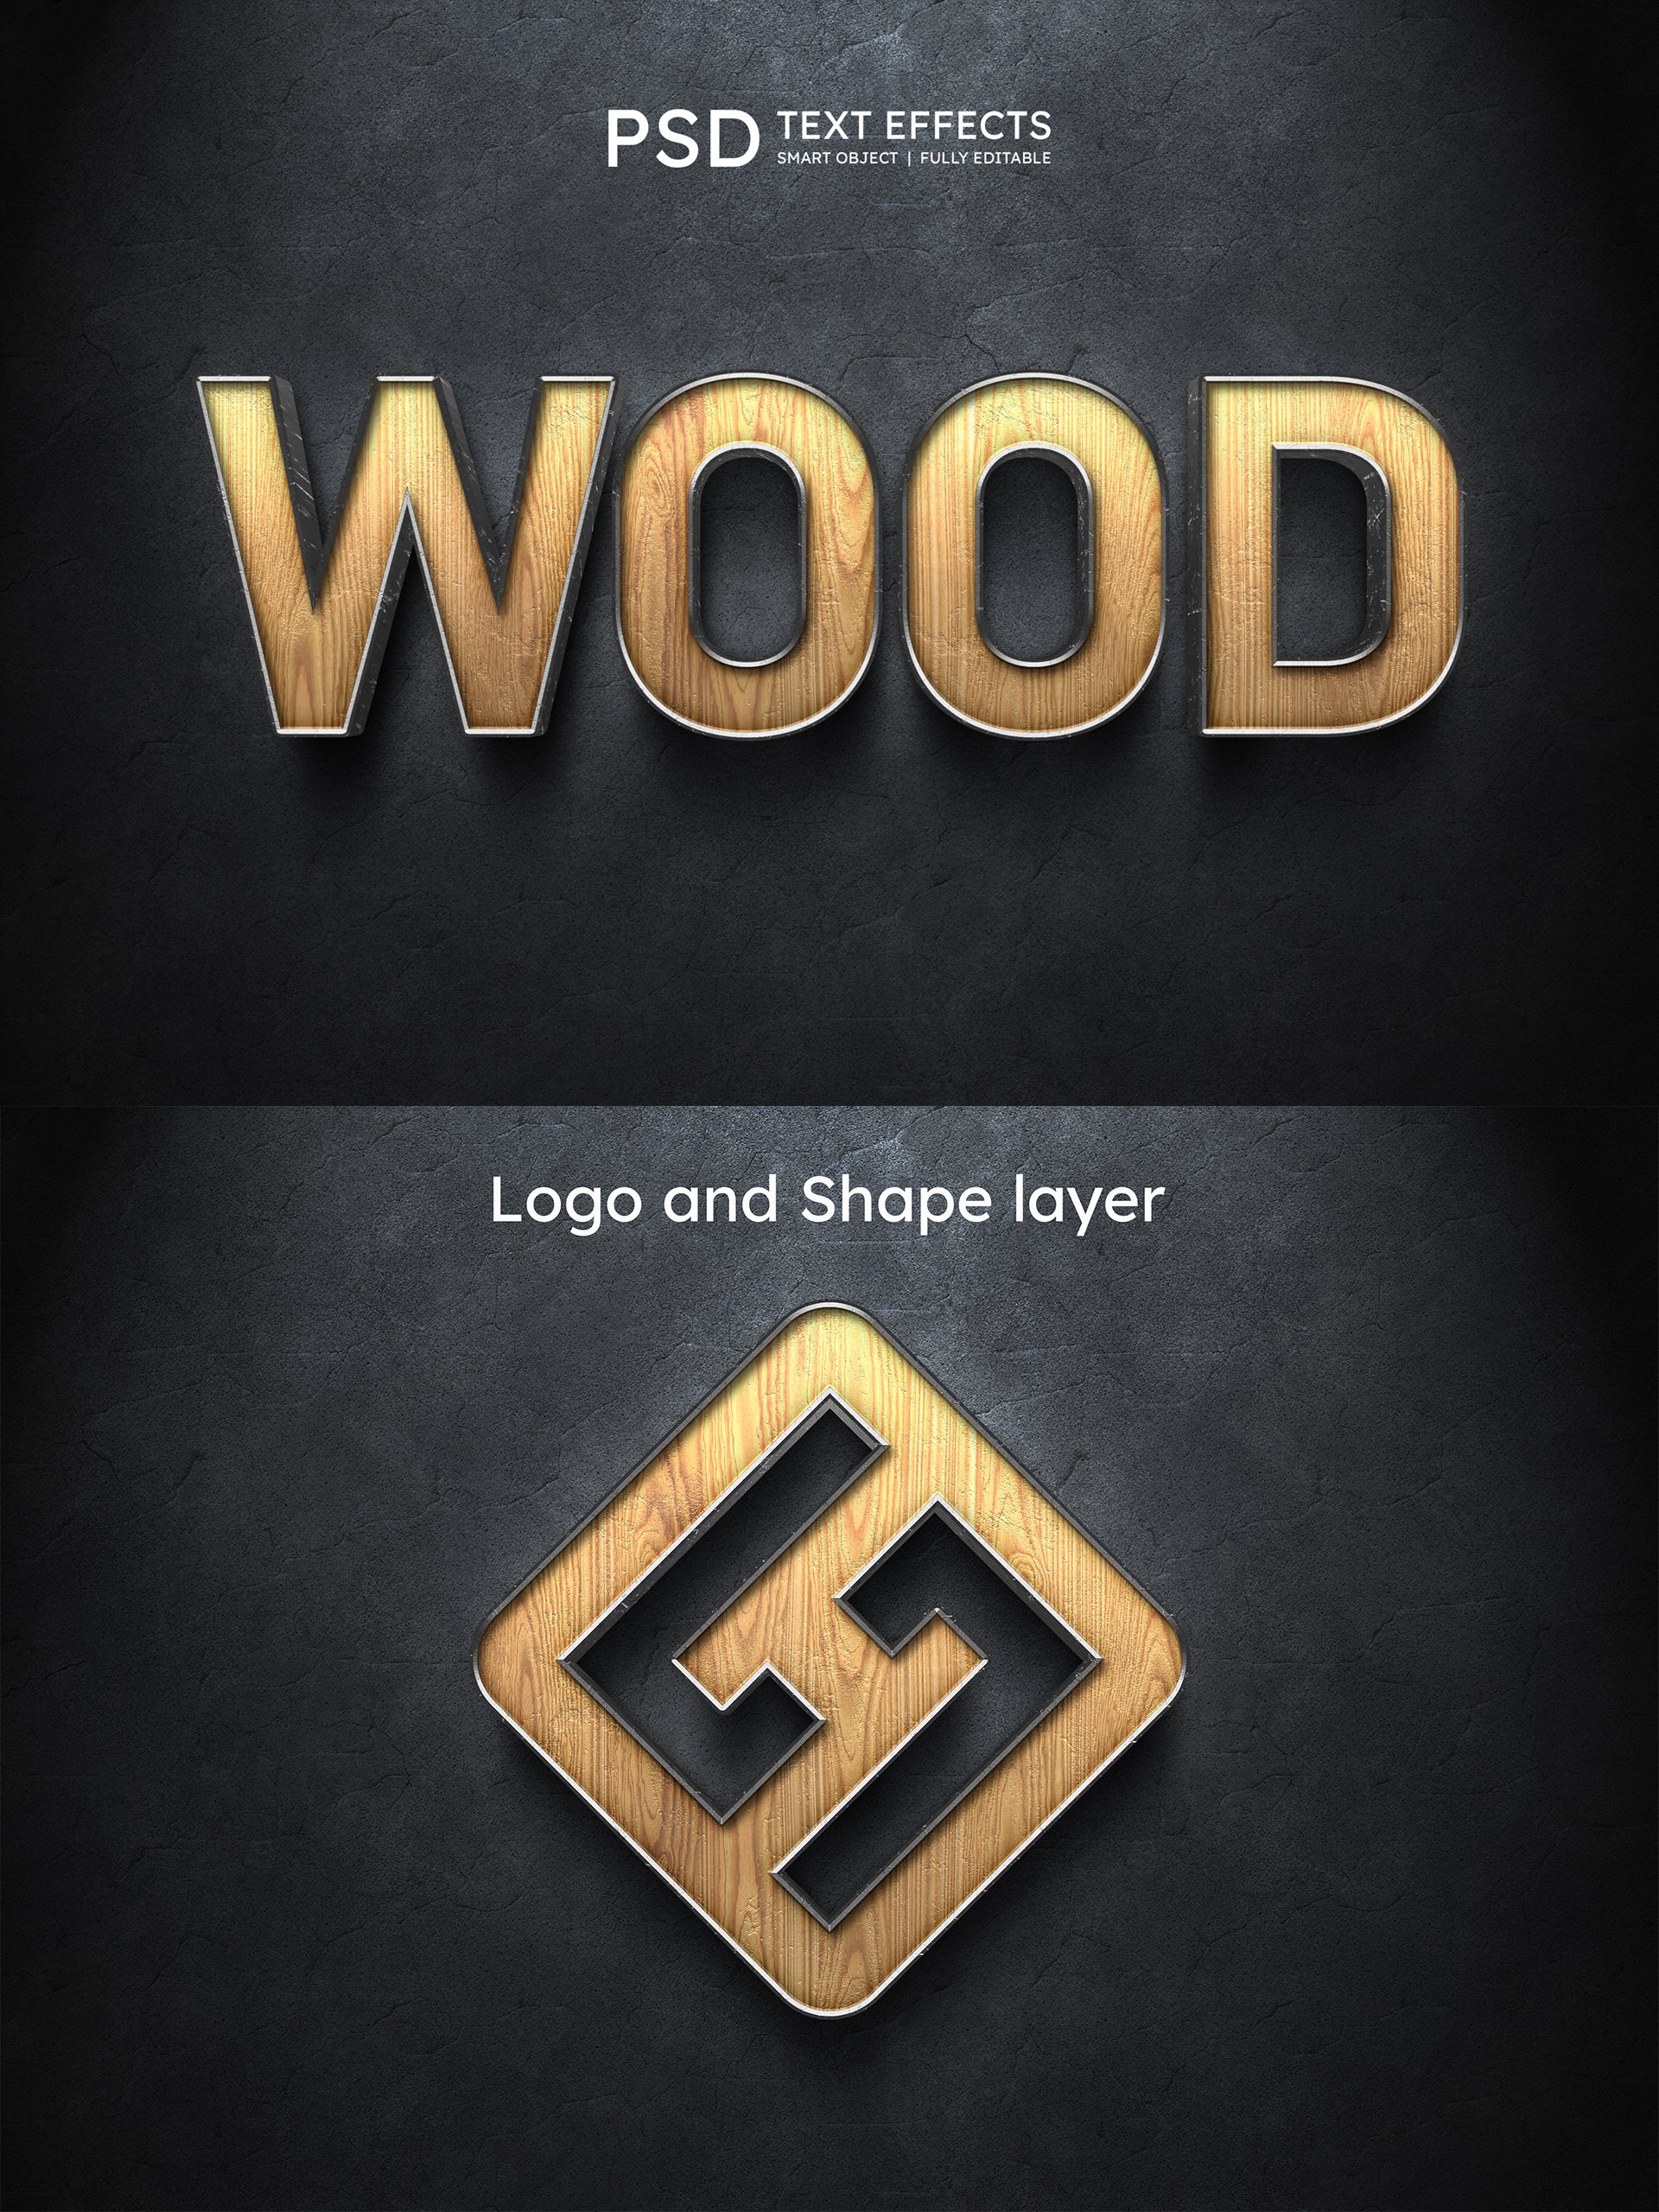 WOOD Text Effect Stylecover image.